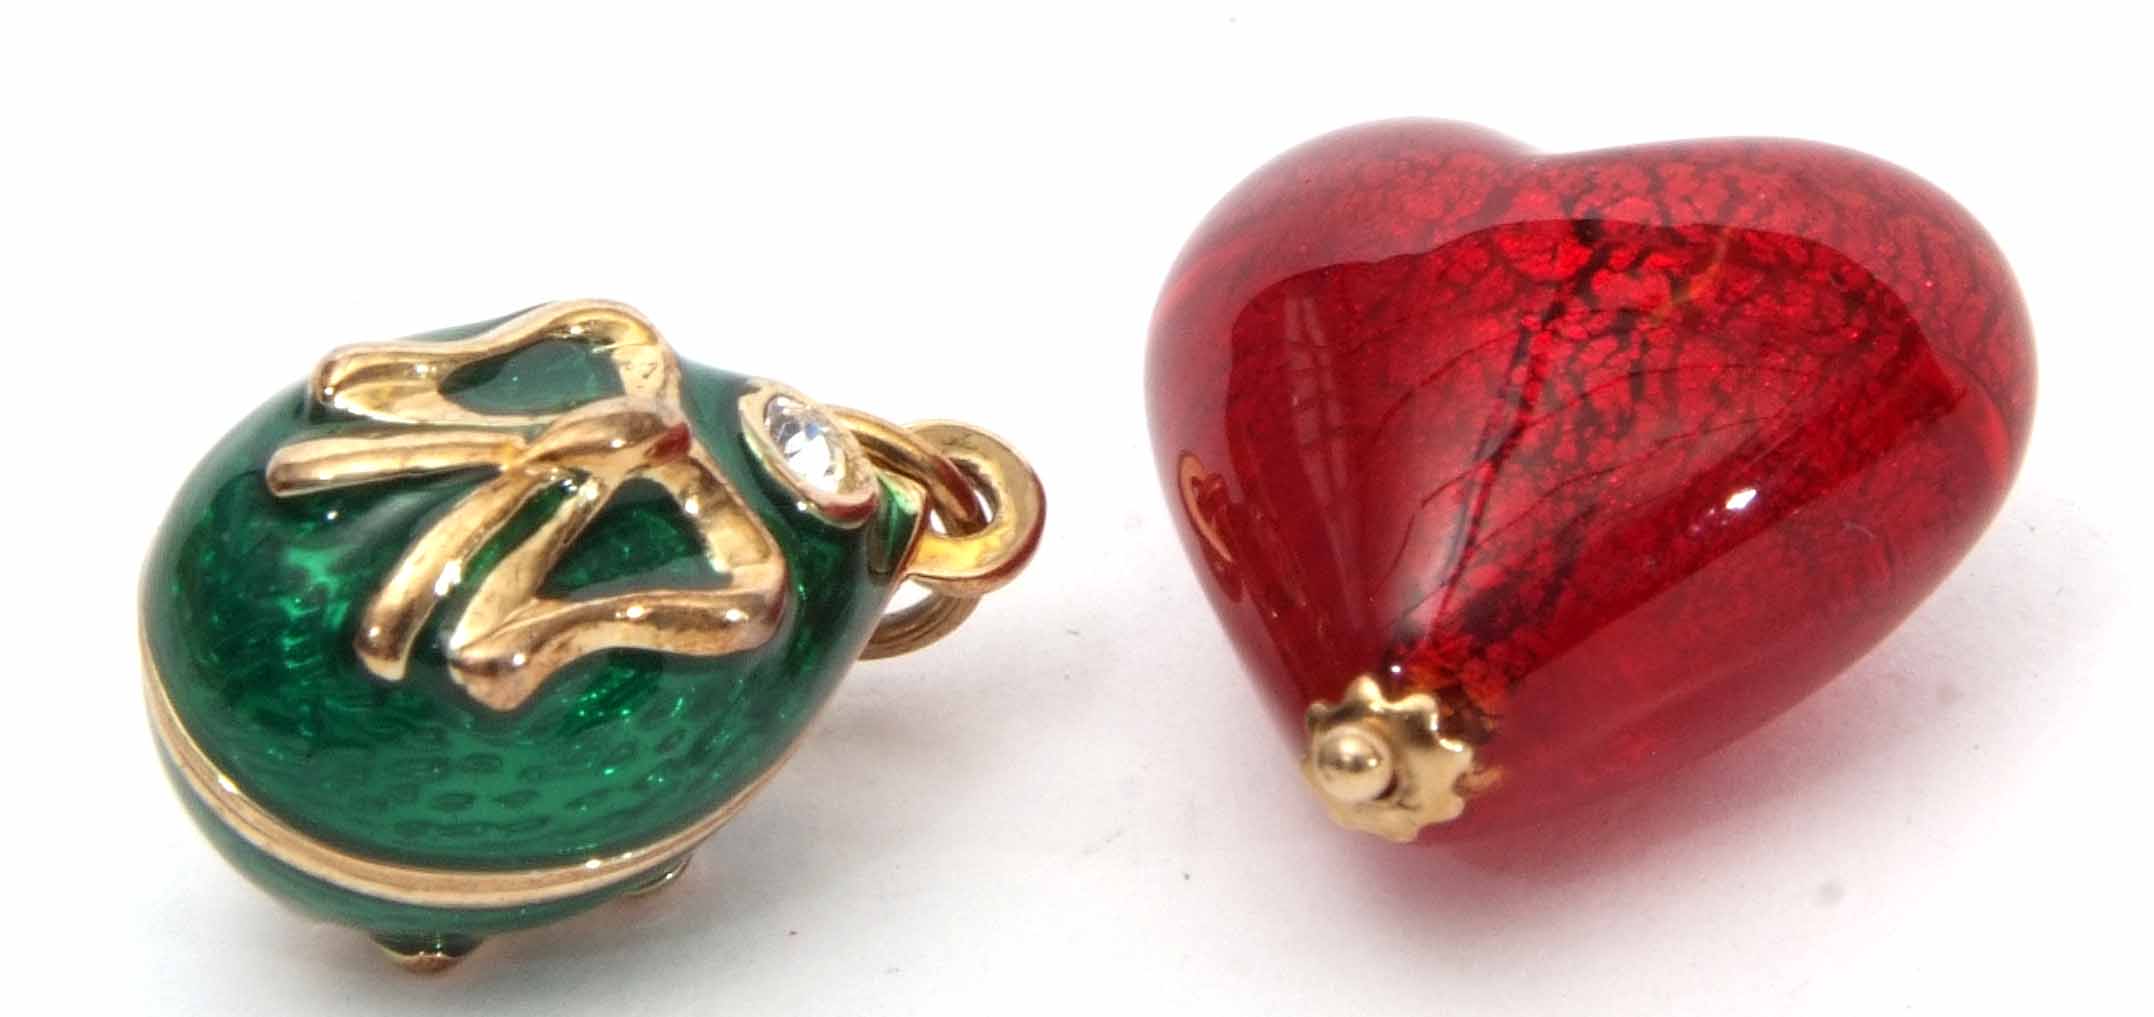 Mixed Lot: modern red enamel heart pendant/charm, the bale stamped 375, together with a modern green